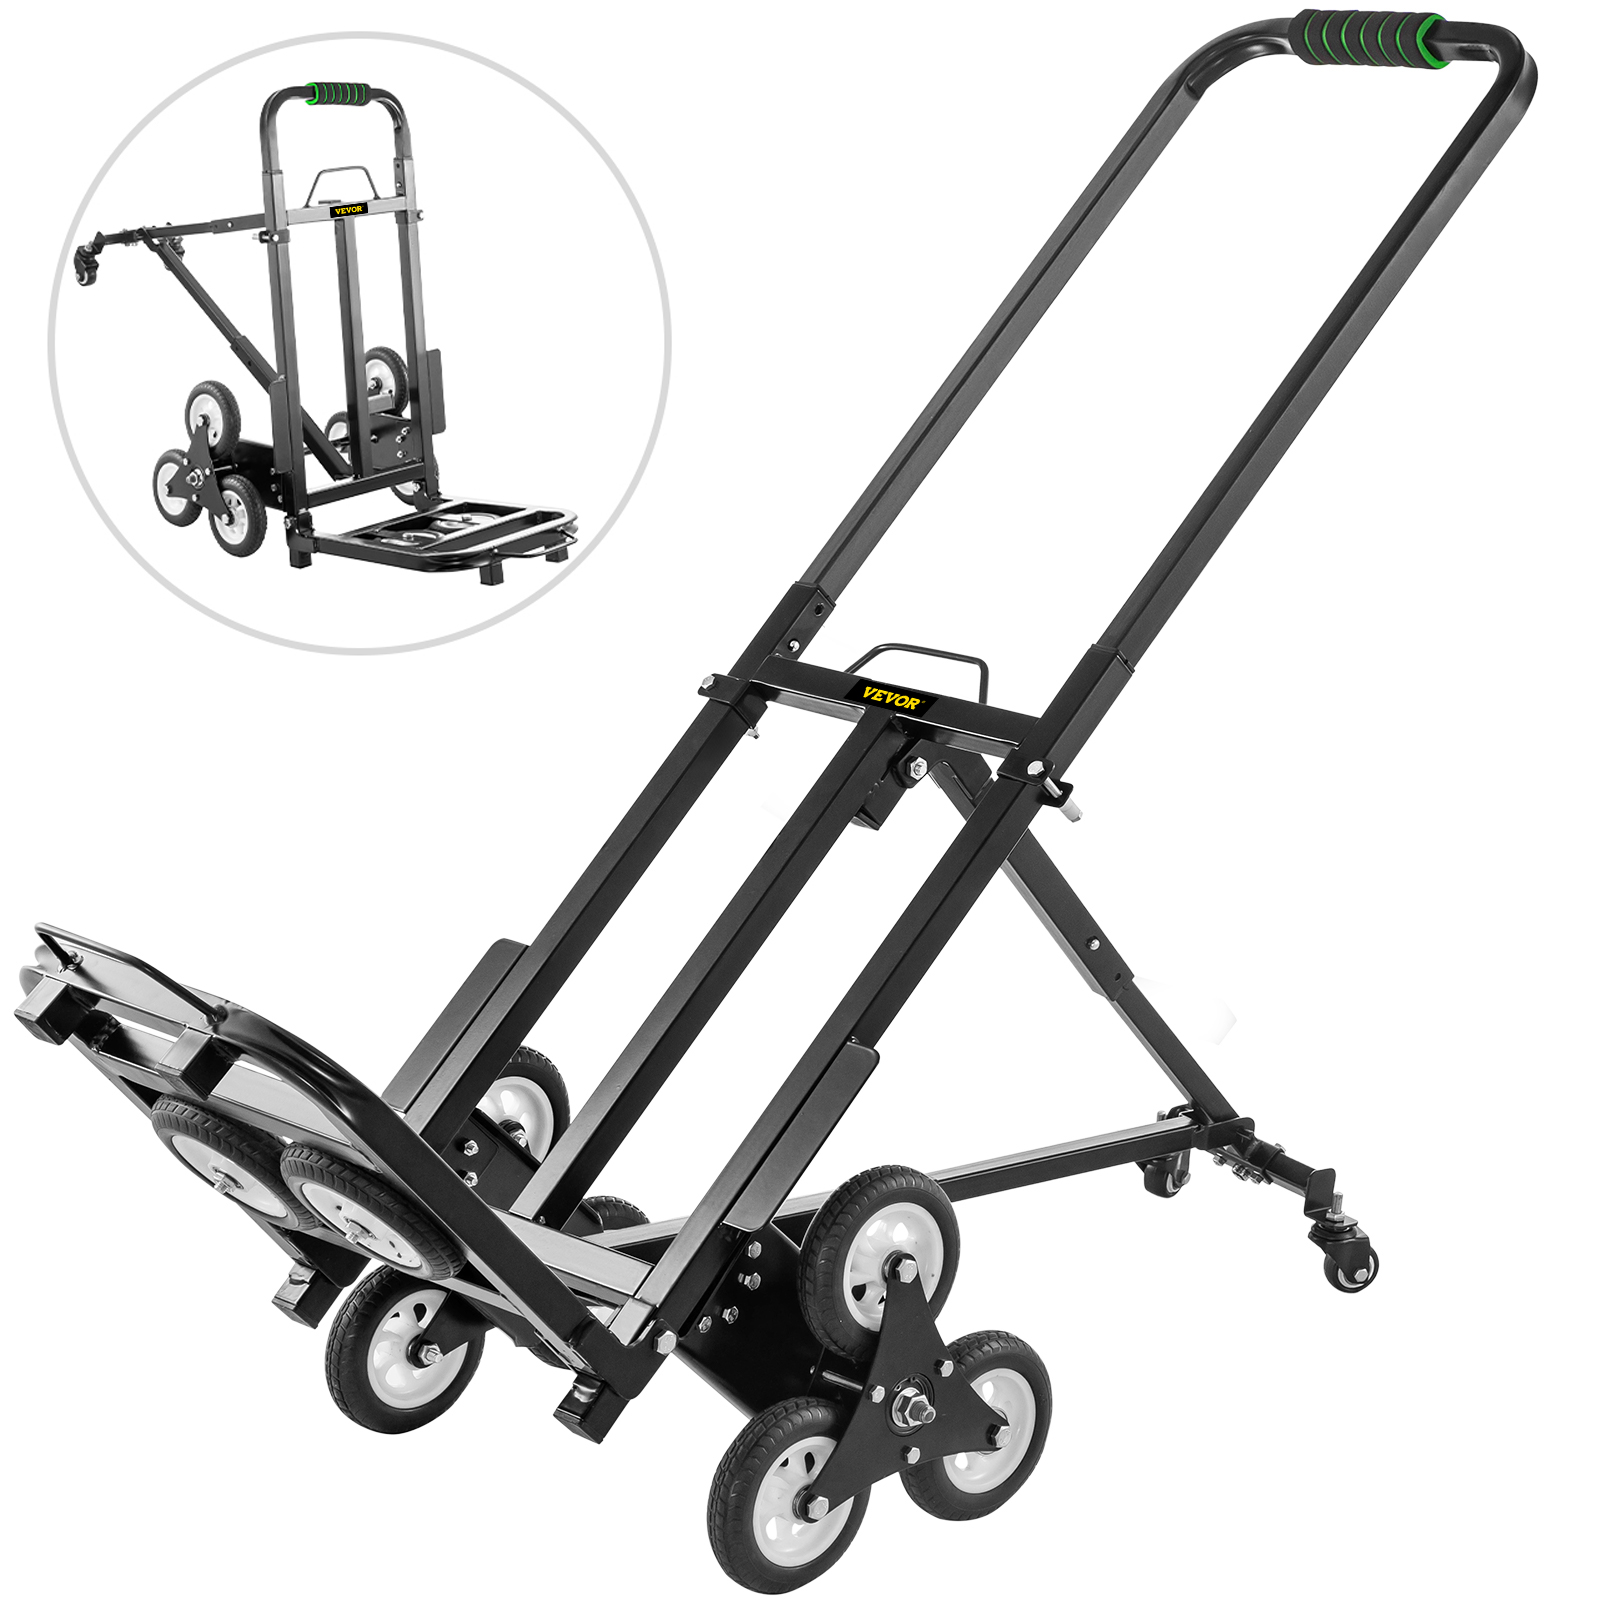 NEW~Foldable Luggage Stair Climber Hand Truck Cart Transport Trolley Heavy 